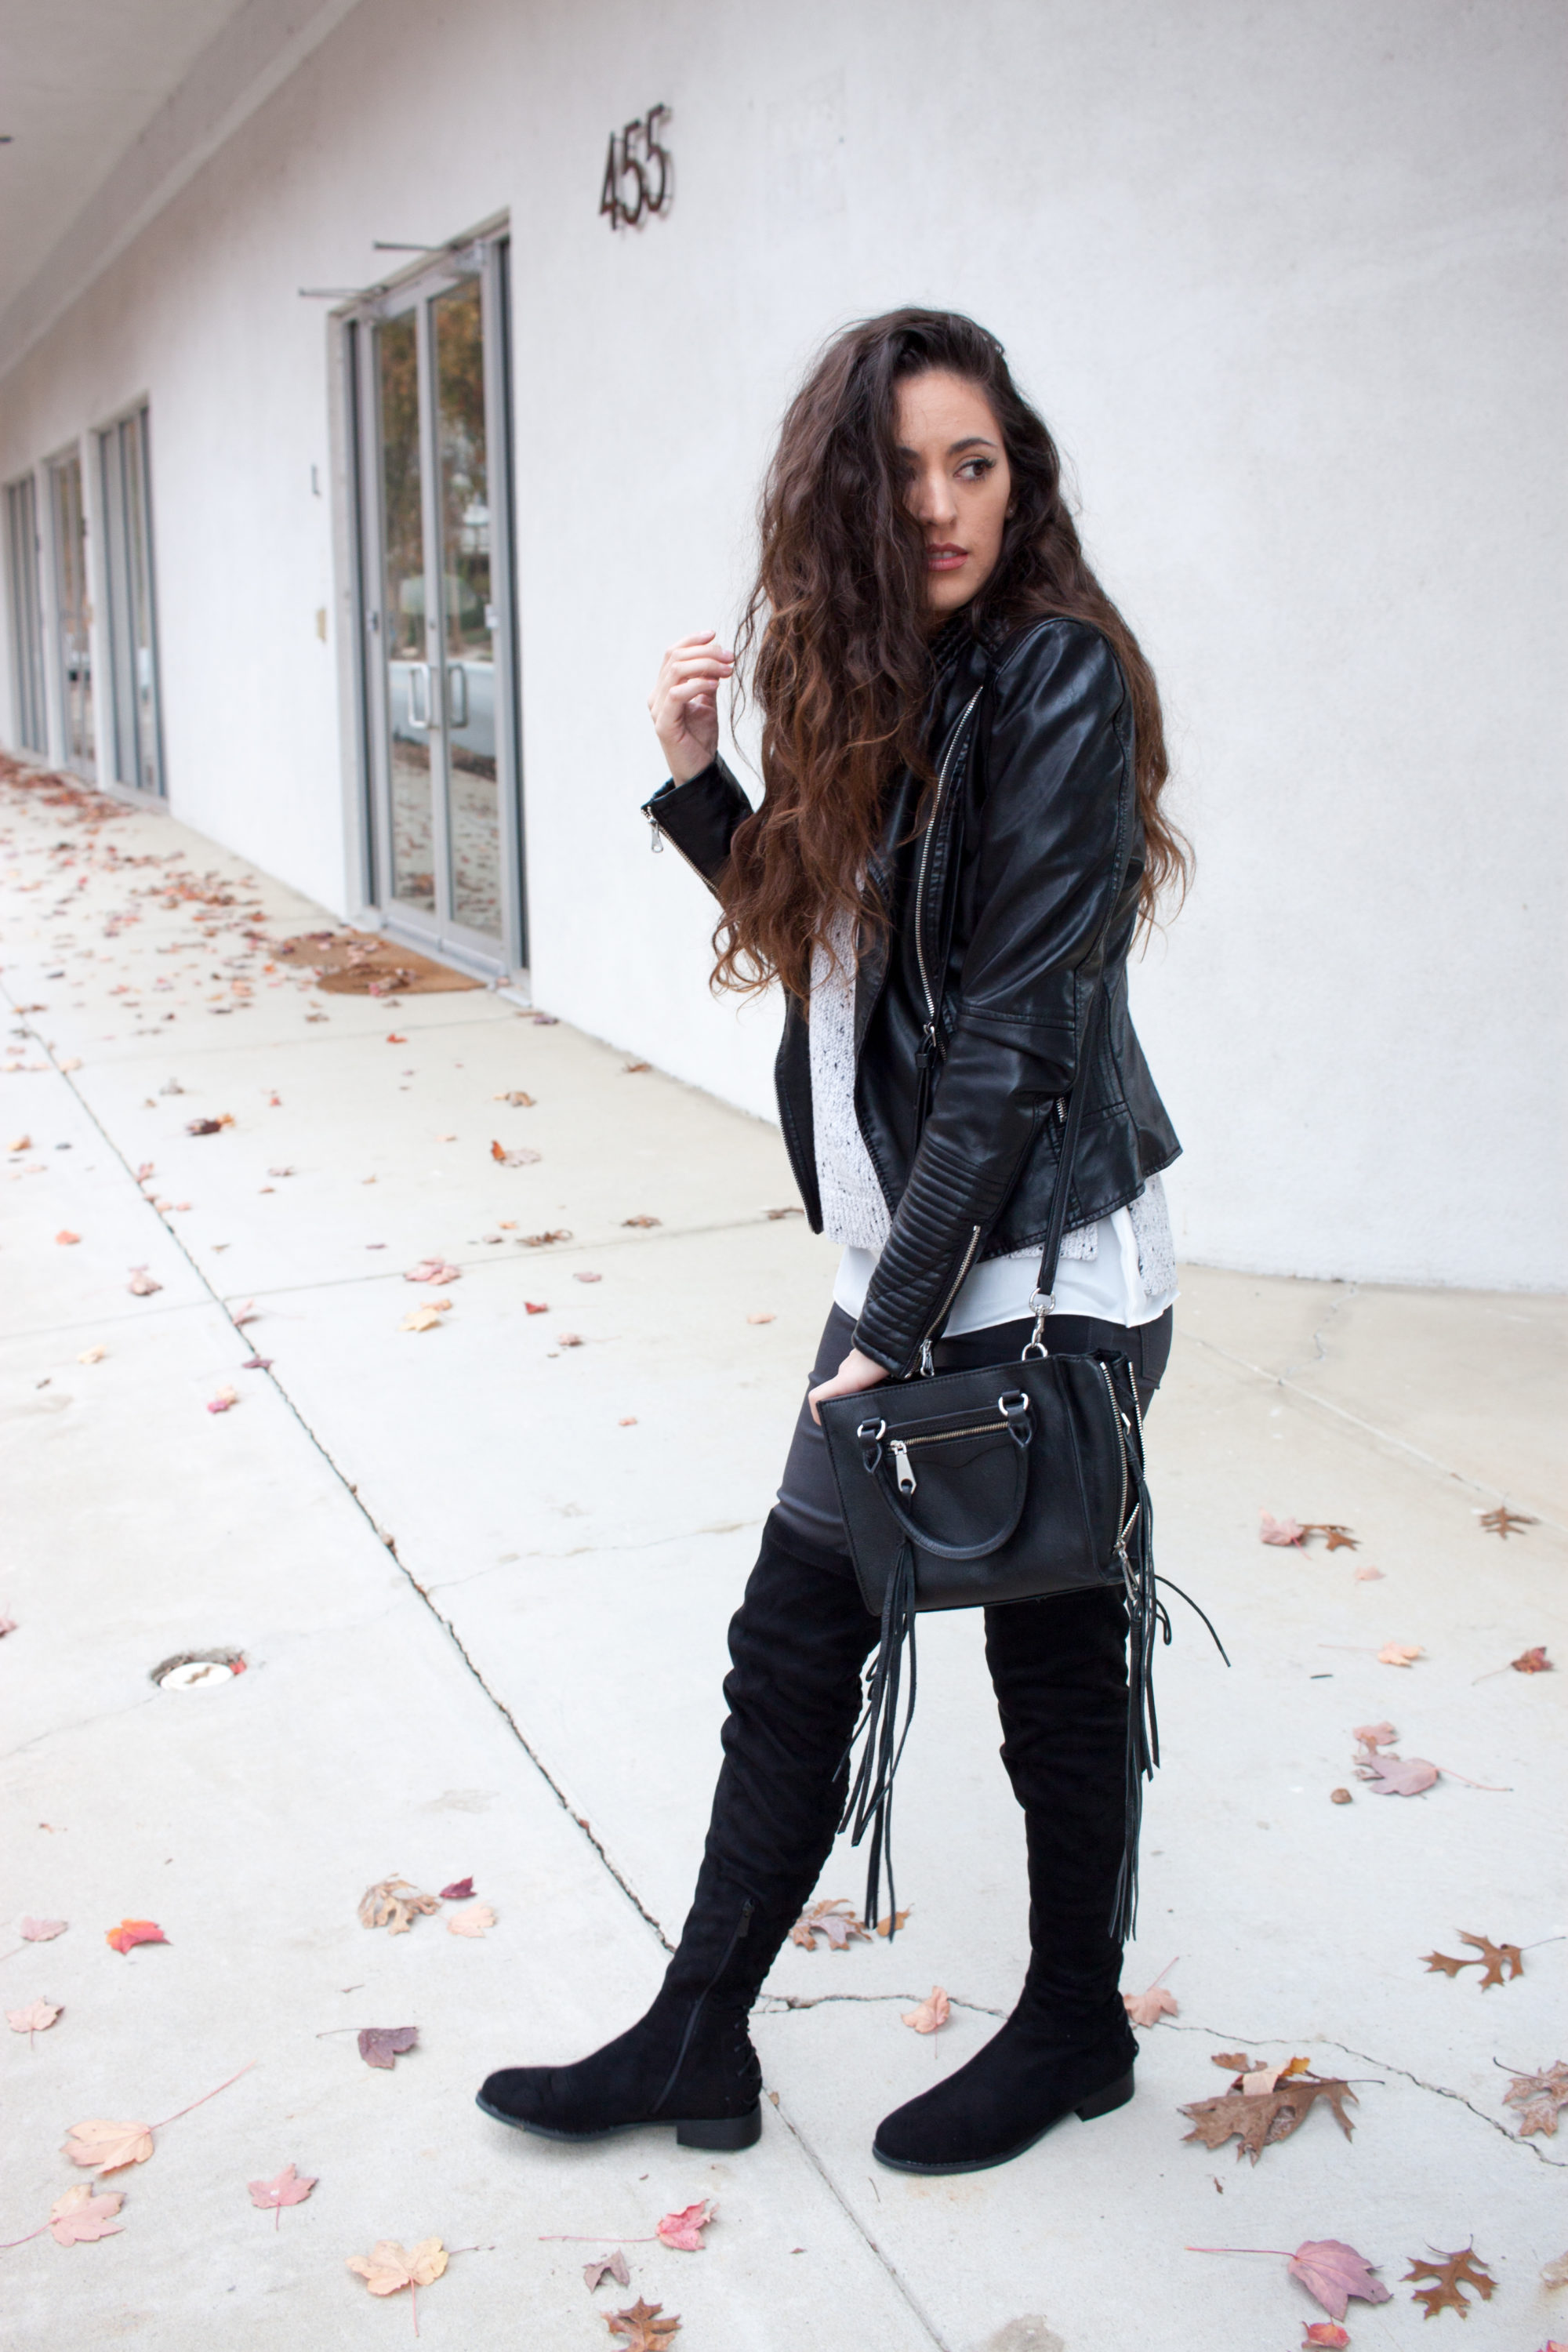 black over the knee boots flat, faux leather jacket, how to wear otk boots in the winter, simple fall style, casual cool fall style, rebecca minkoff black crossbody, rebecca minkoff side zip mini regan tote, atlanta style blogger, fall in the south, winter in the south, southern blogger